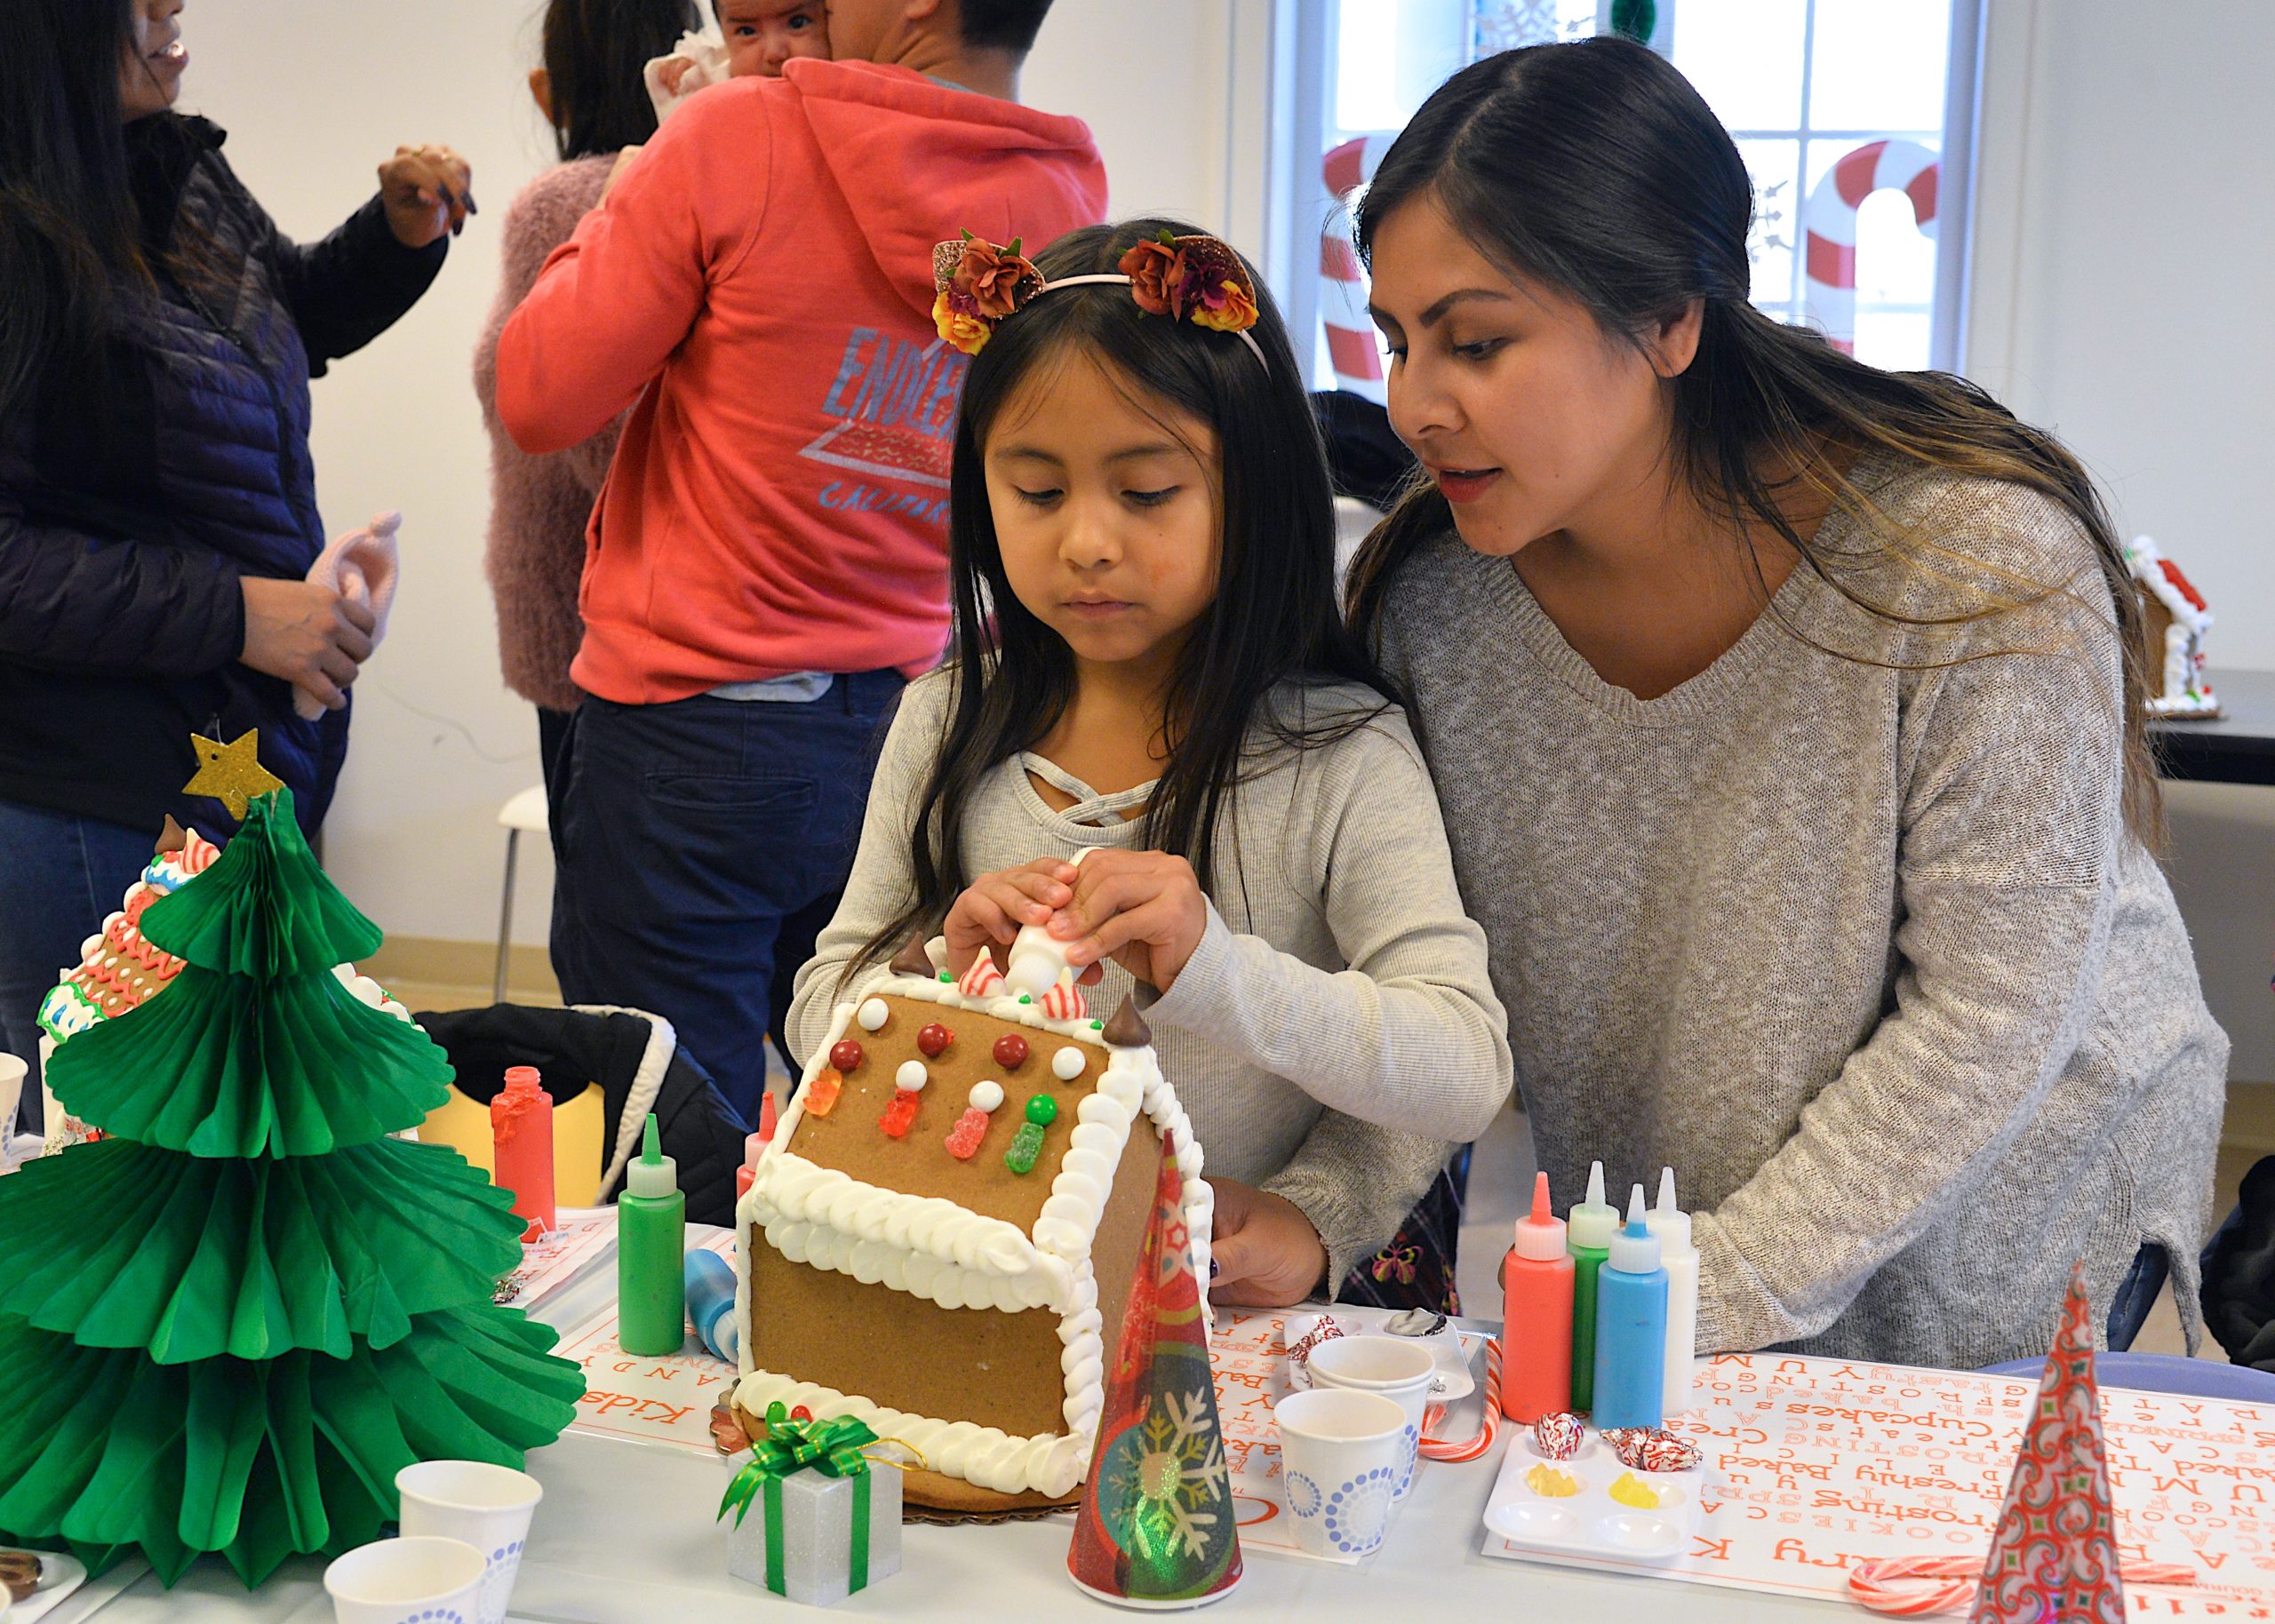 Guild Hall offered an opportunity to get in the holiday spirit by making gingerbread houses on Saturday. Sofia Calle and Andrea Vera working together.  KYRIL BROMLEY 